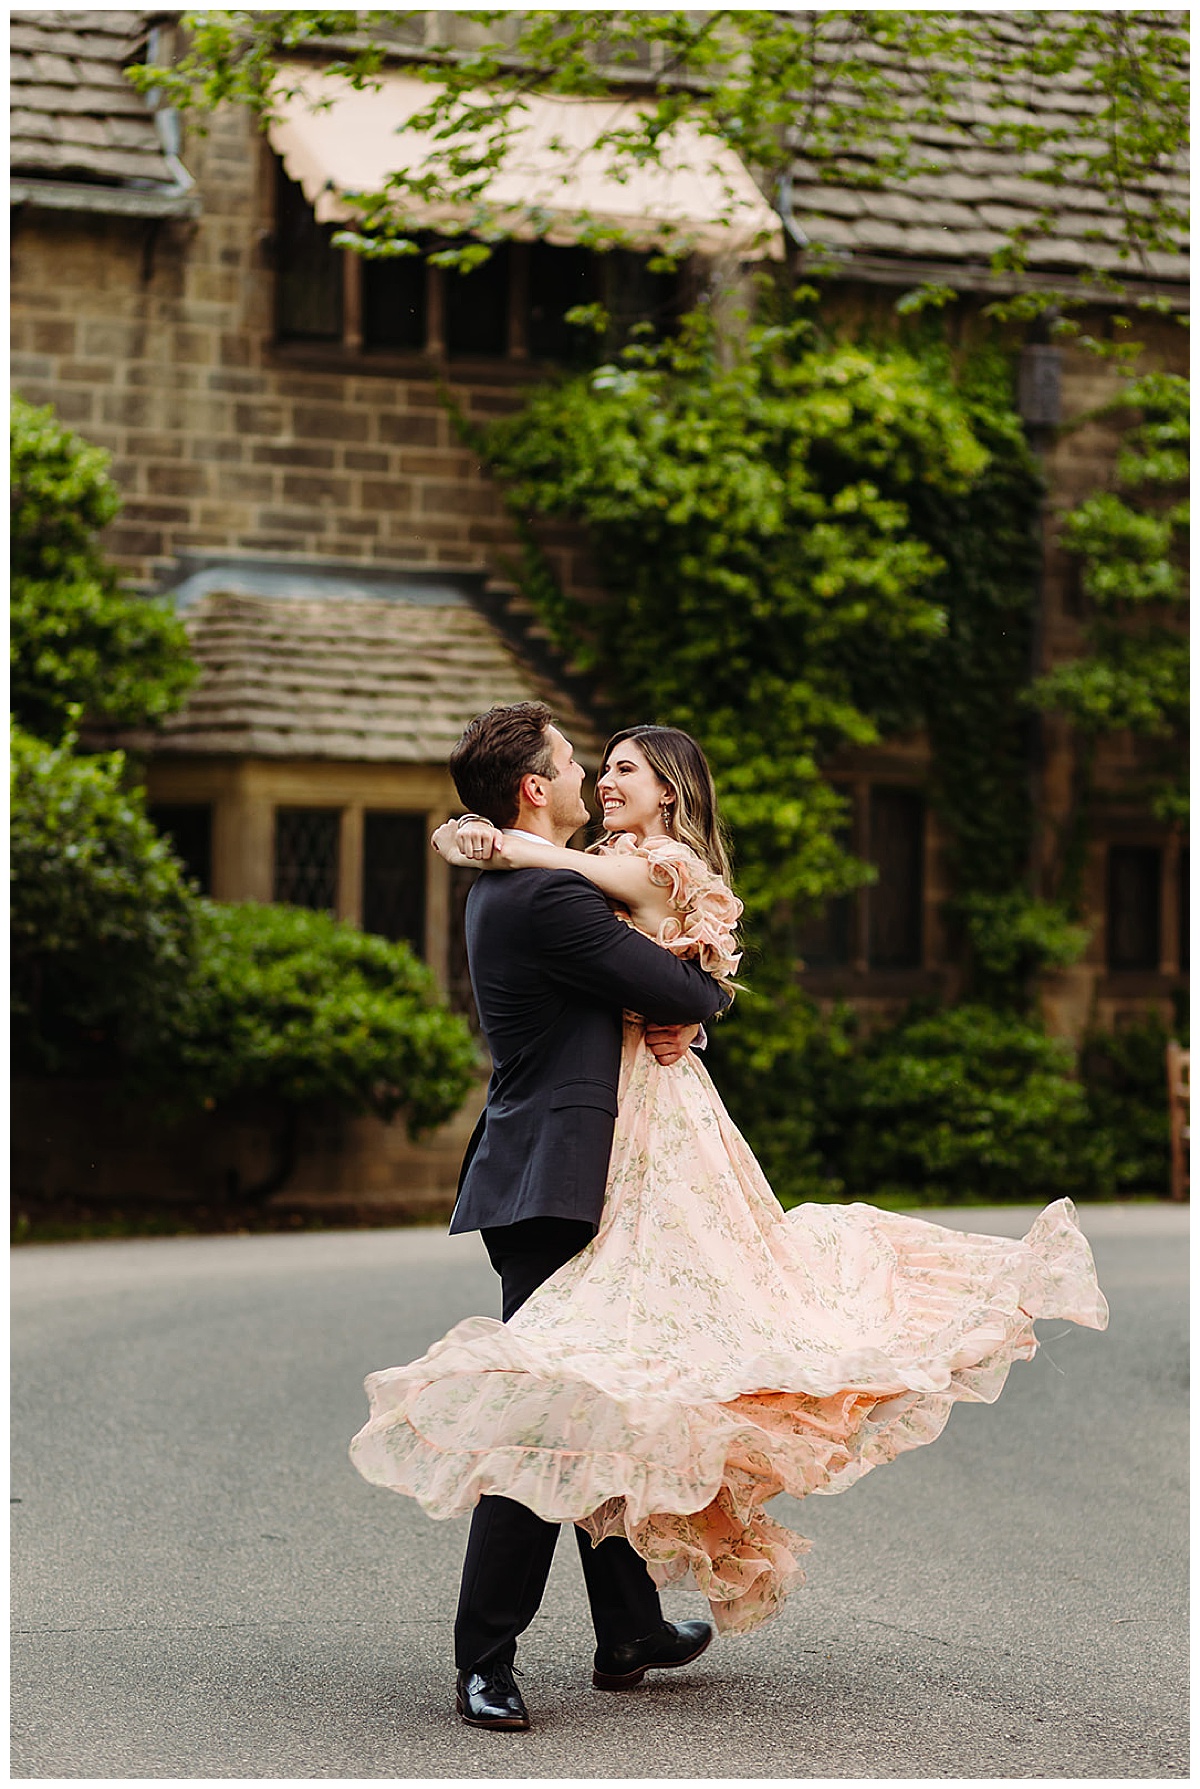 Man and woman dance together for Detroit Wedding Photographer 